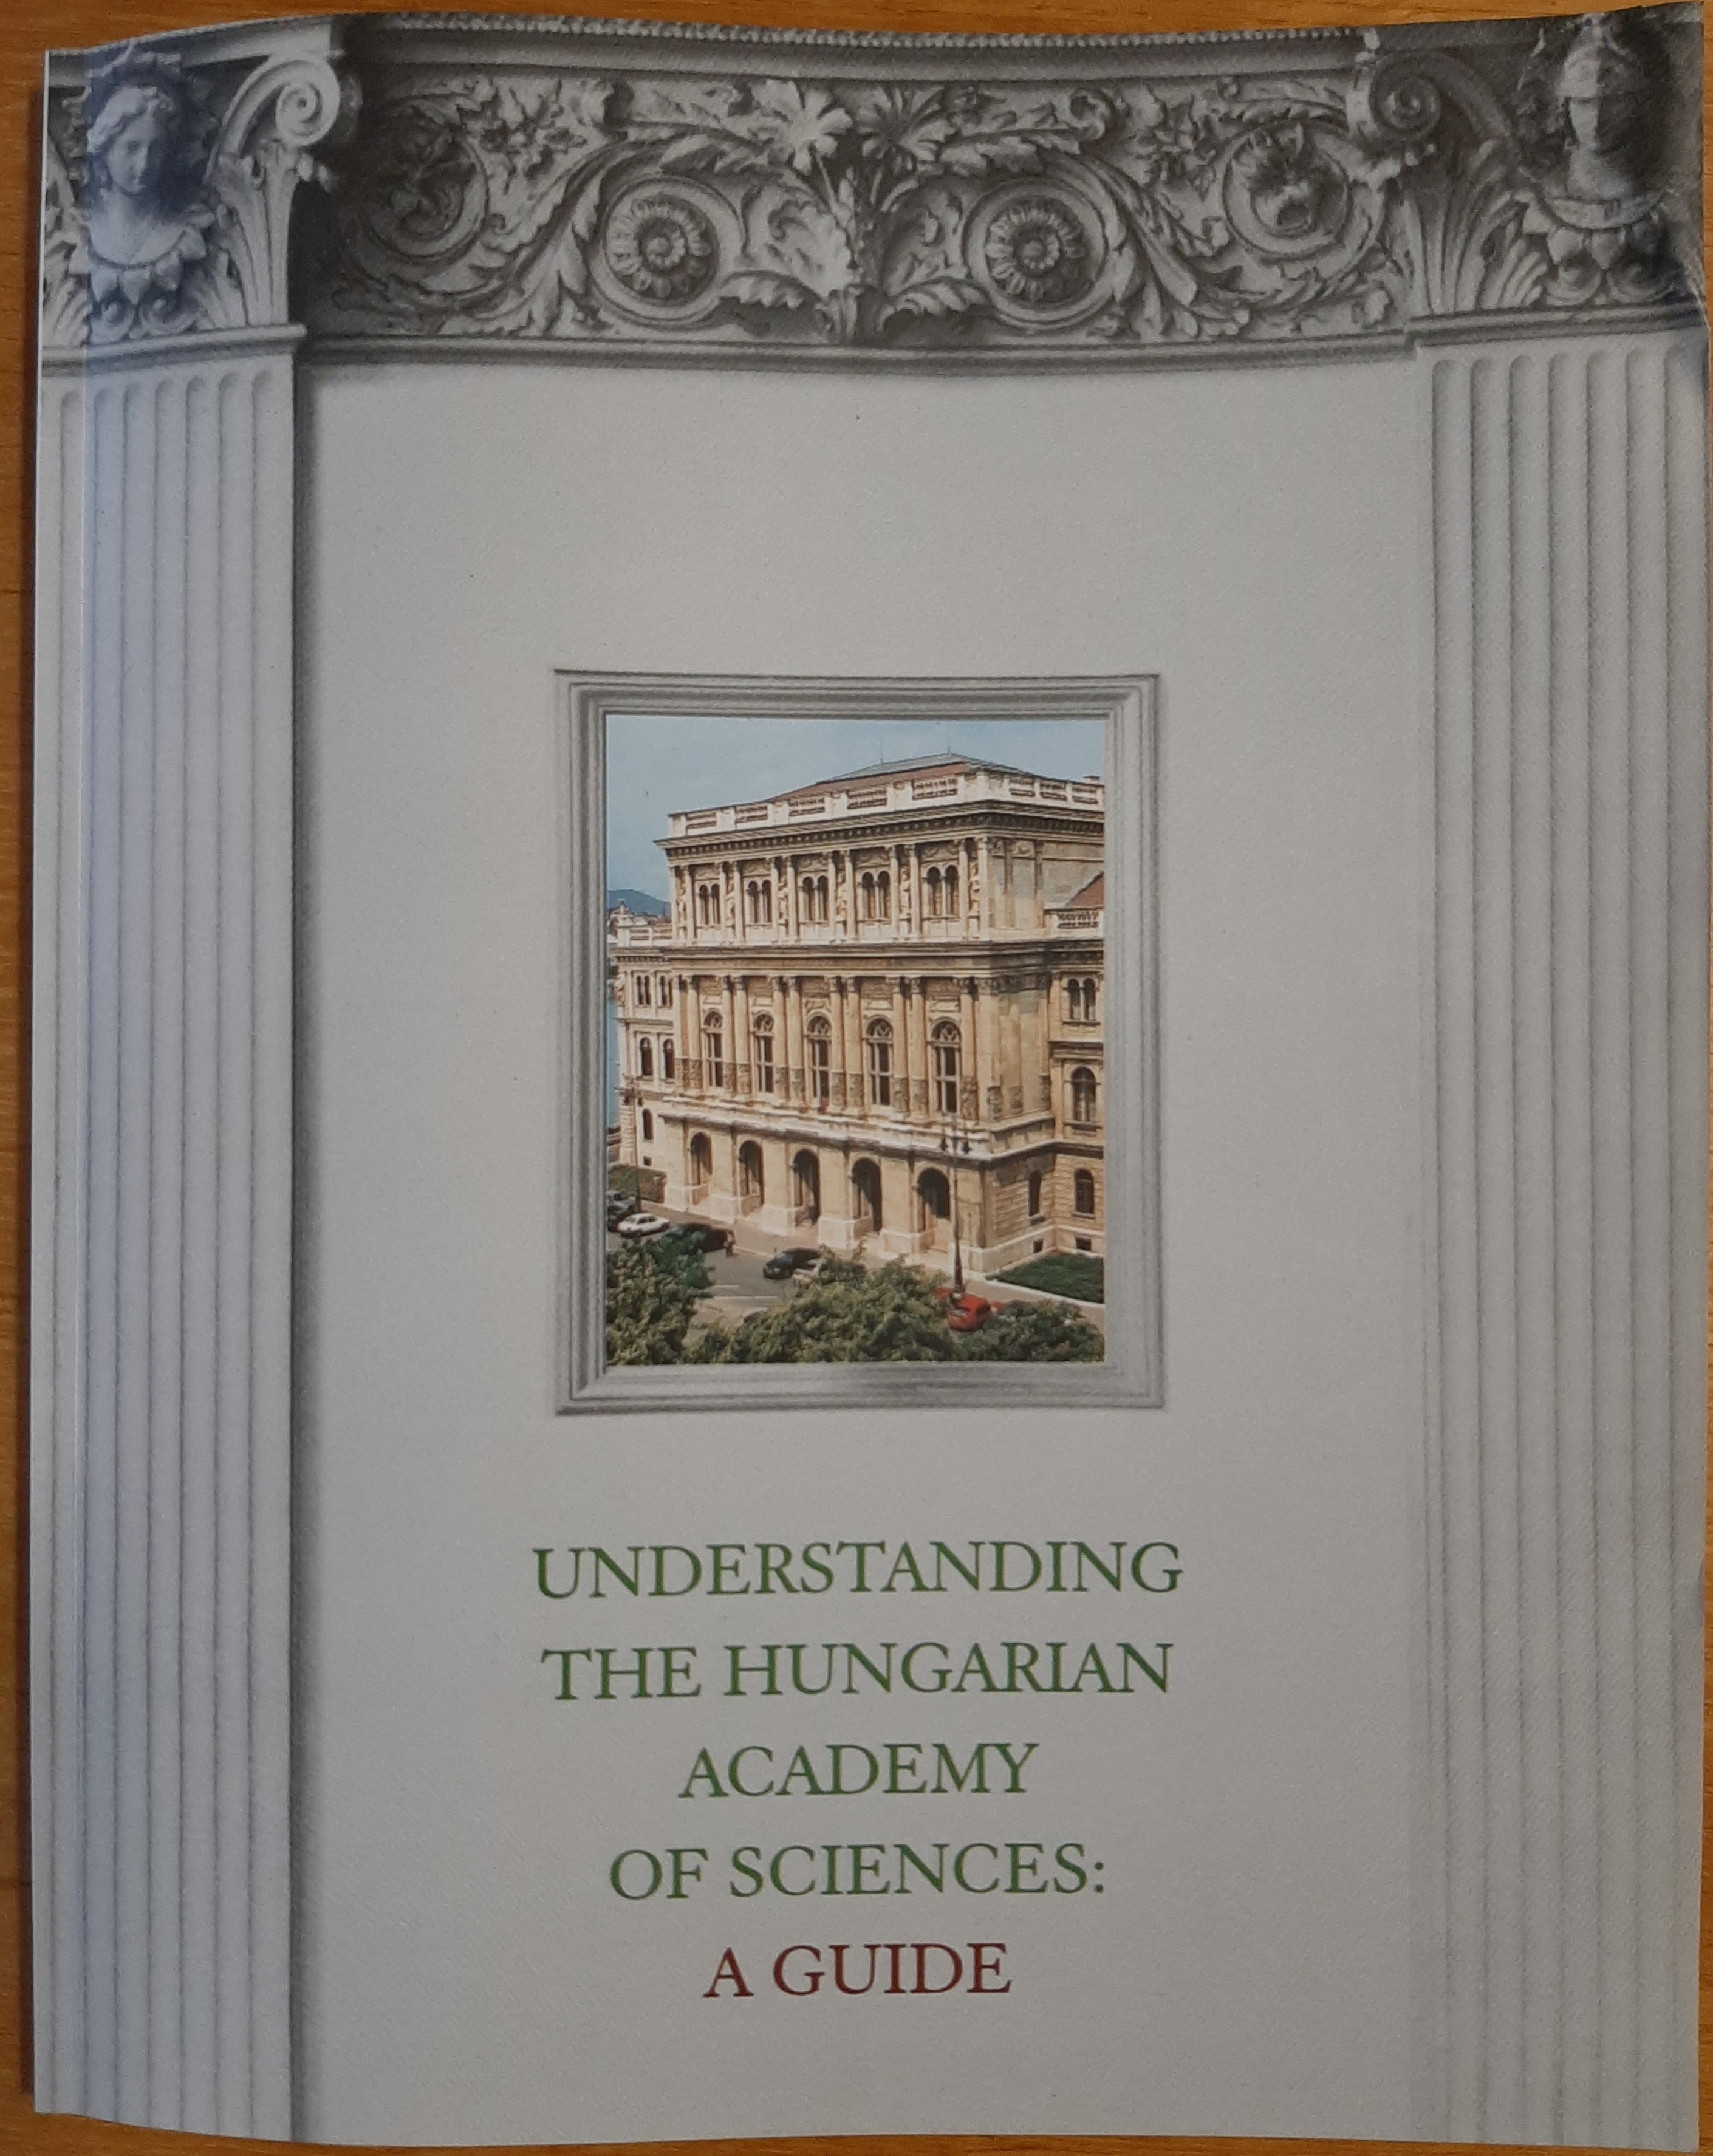 Understanding the Hungarian Academy of Sciences: A guide (Rippl-Rónai Múzeum CC BY-NC-ND)